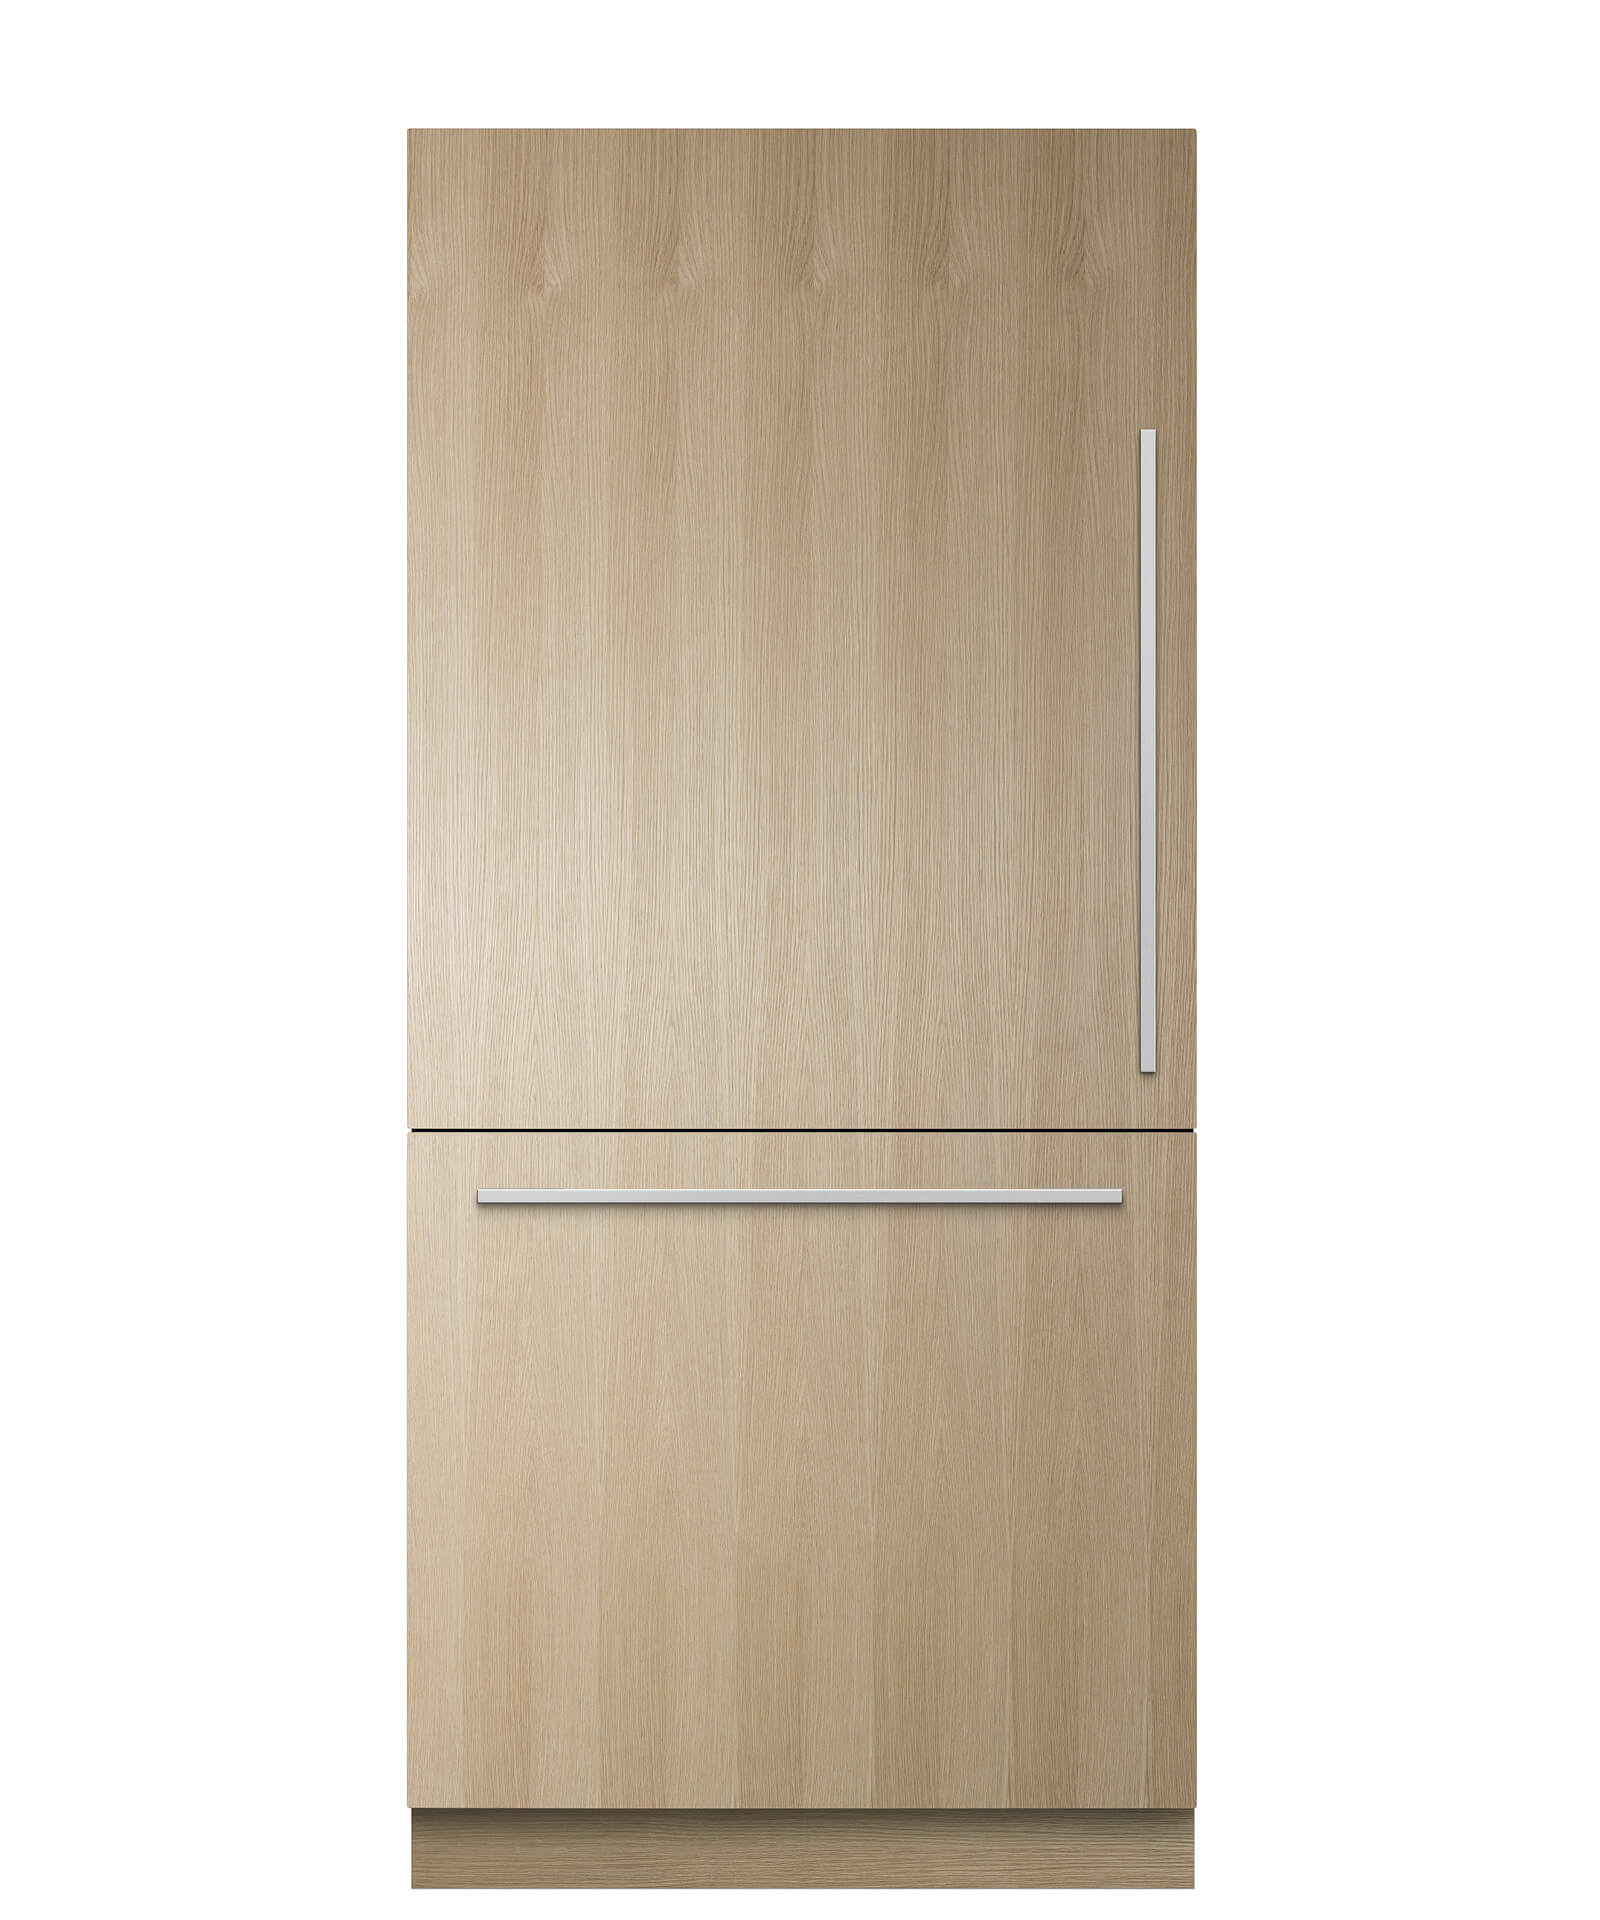 Rs9120wlj1 Integrated Fridge Freezer With Ice Fisher Paykel Uk